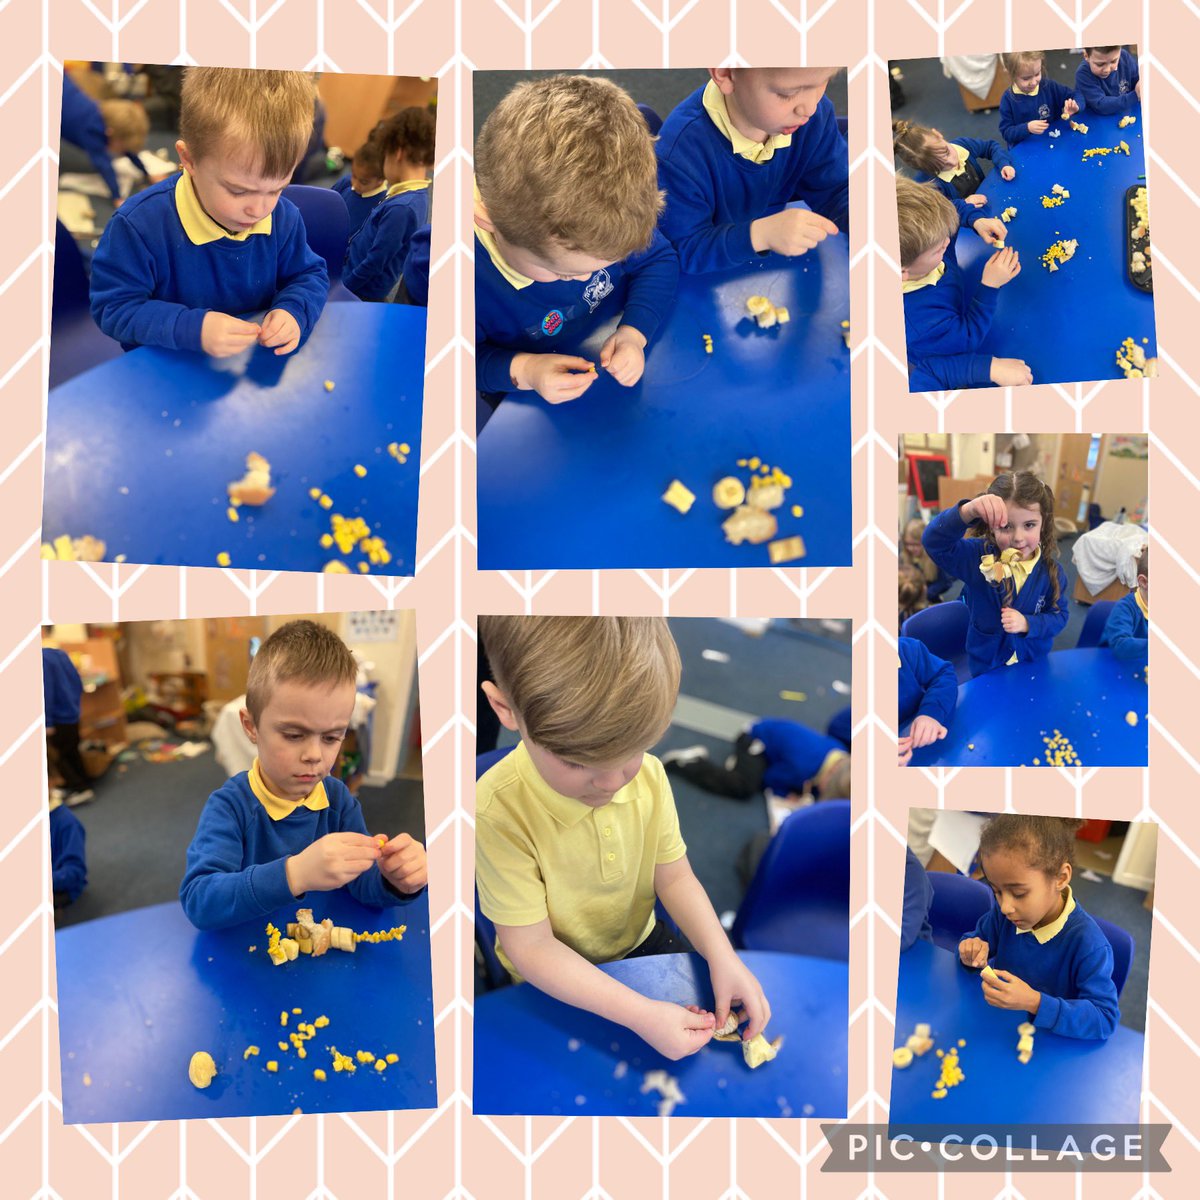 We have been taking part in the #BigSchoolsBirdwatch We made bird kebabs to attract the birds into our grounds. We then went bird spotting, collecting data of all the birds spotted @rhosyfedwen @EcoSchools_TW @BeckyEco_Ed @Natures_Voice #EthicalEvan 🐦 🌲